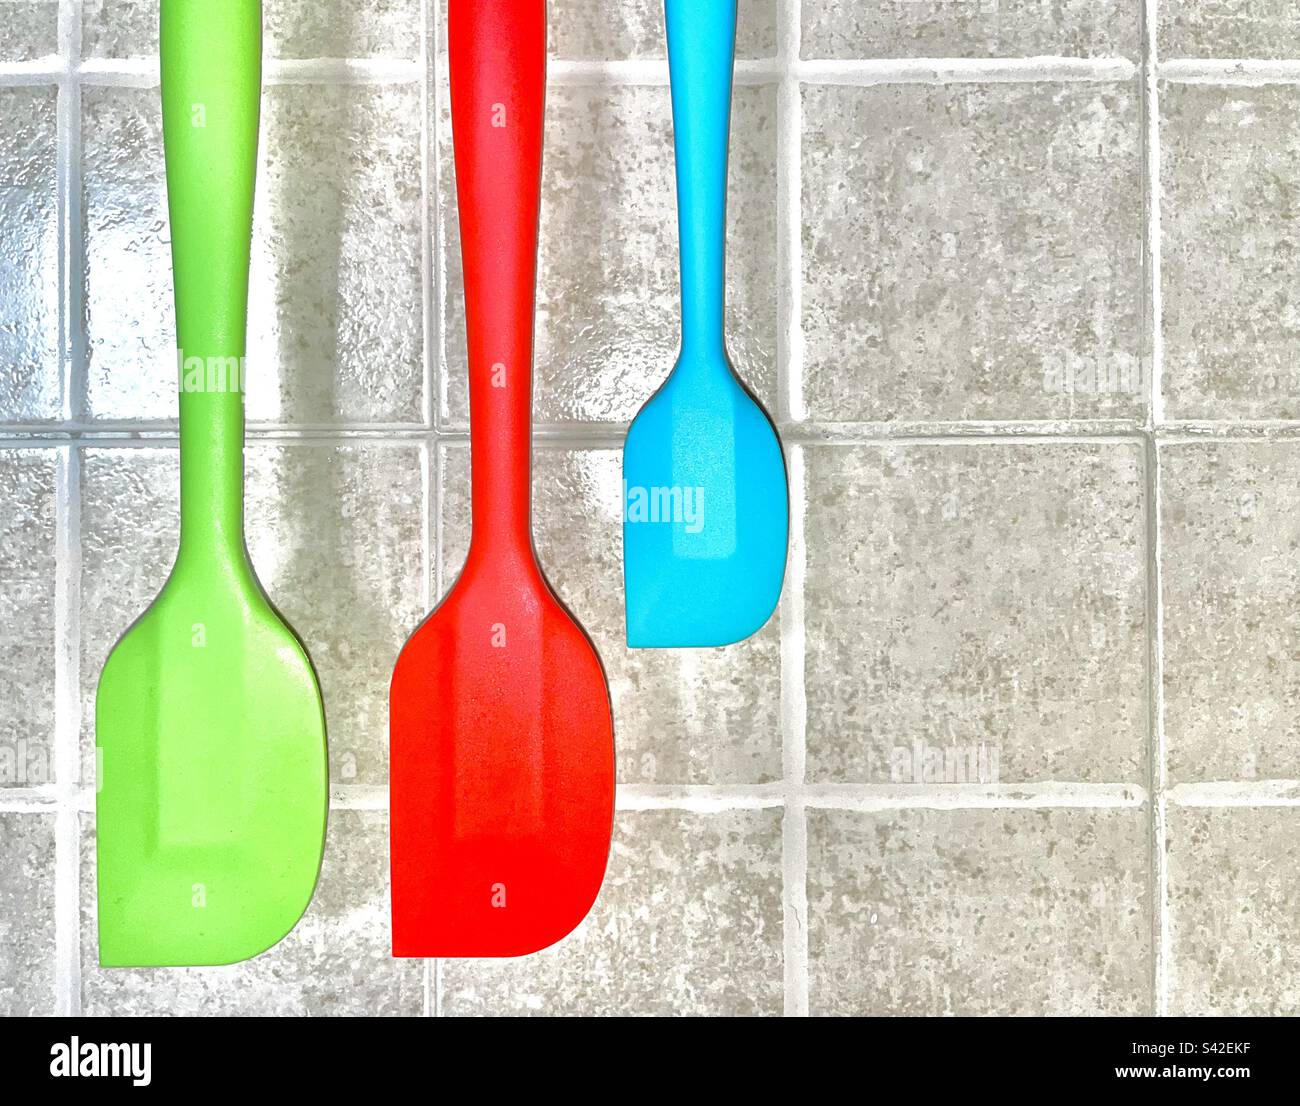 https://c8.alamy.com/comp/S42EKF/red-greed-and-blue-three-pieces-of-silicone-spatula-rubber-kitchen-utensils-S42EKF.jpg